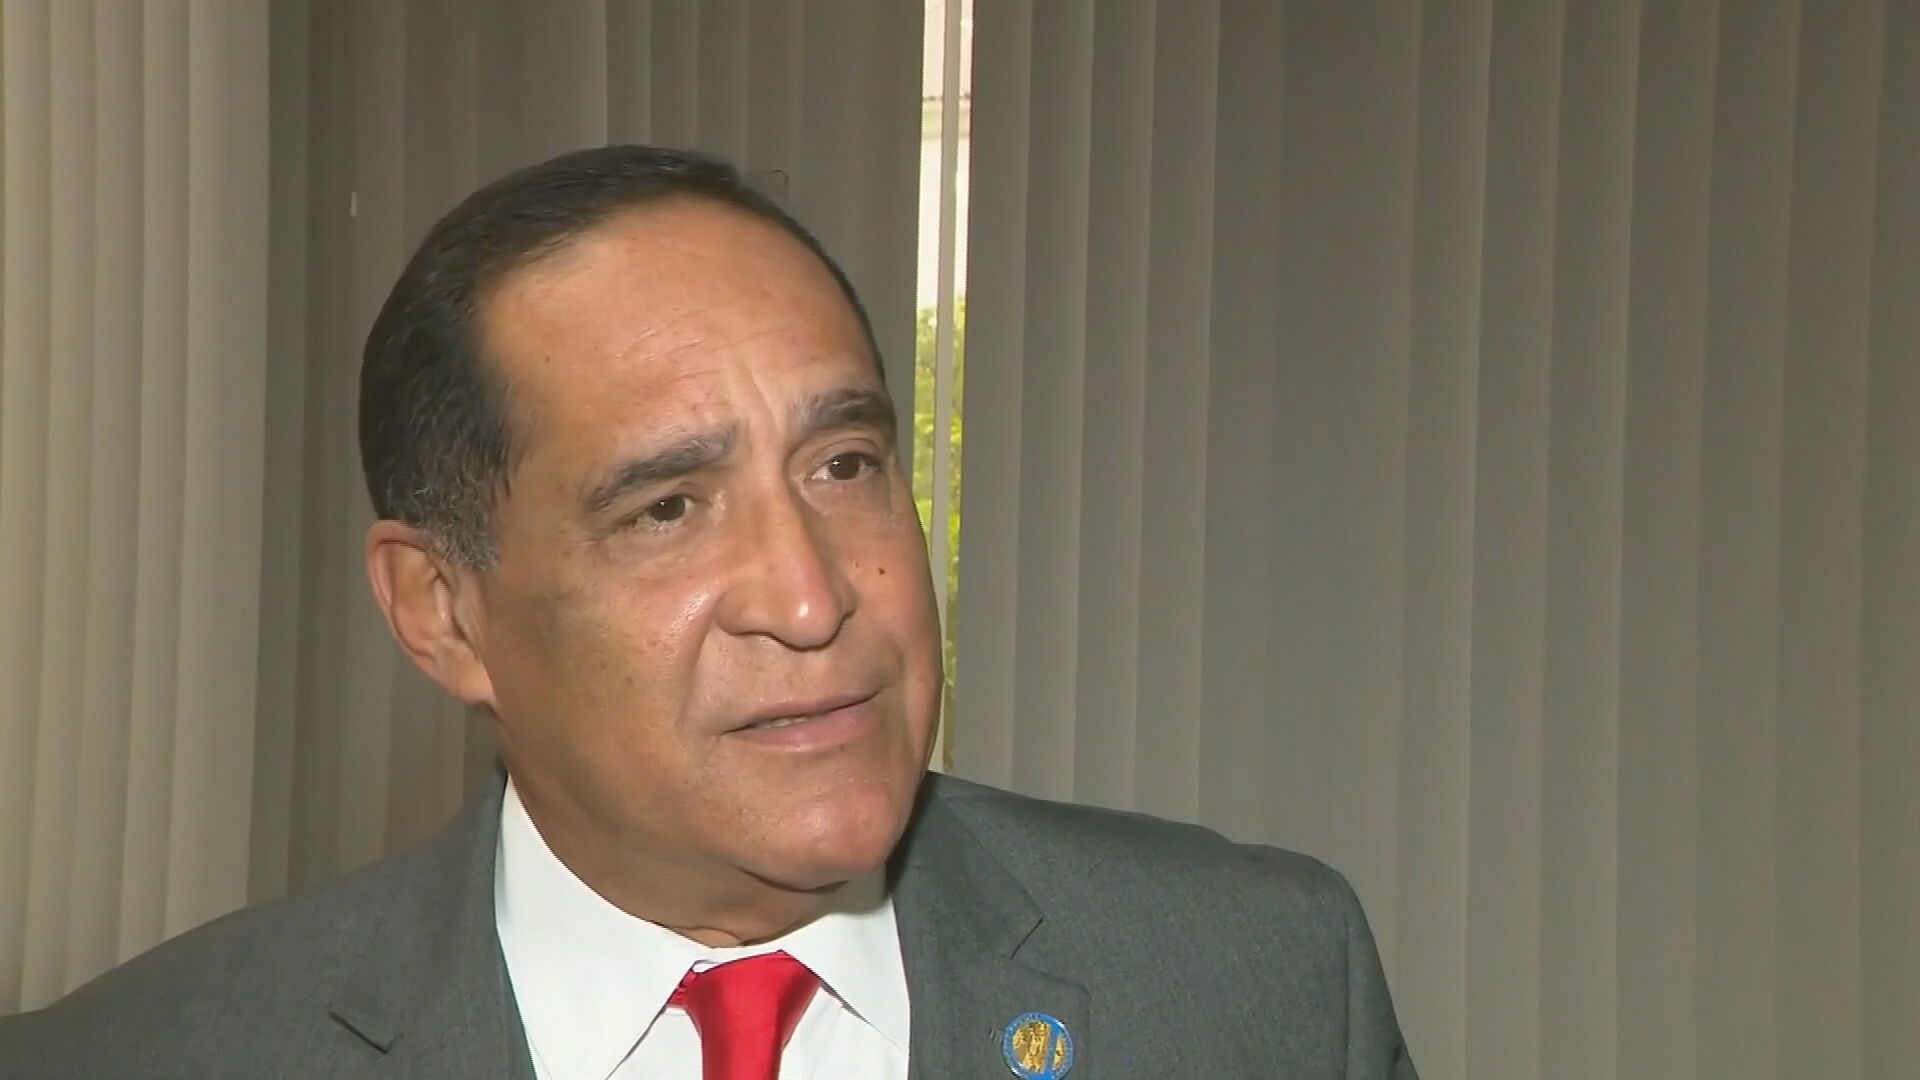 Miami-Dade Commissioner Joe Martinez to turn himself in to authorities, per  source